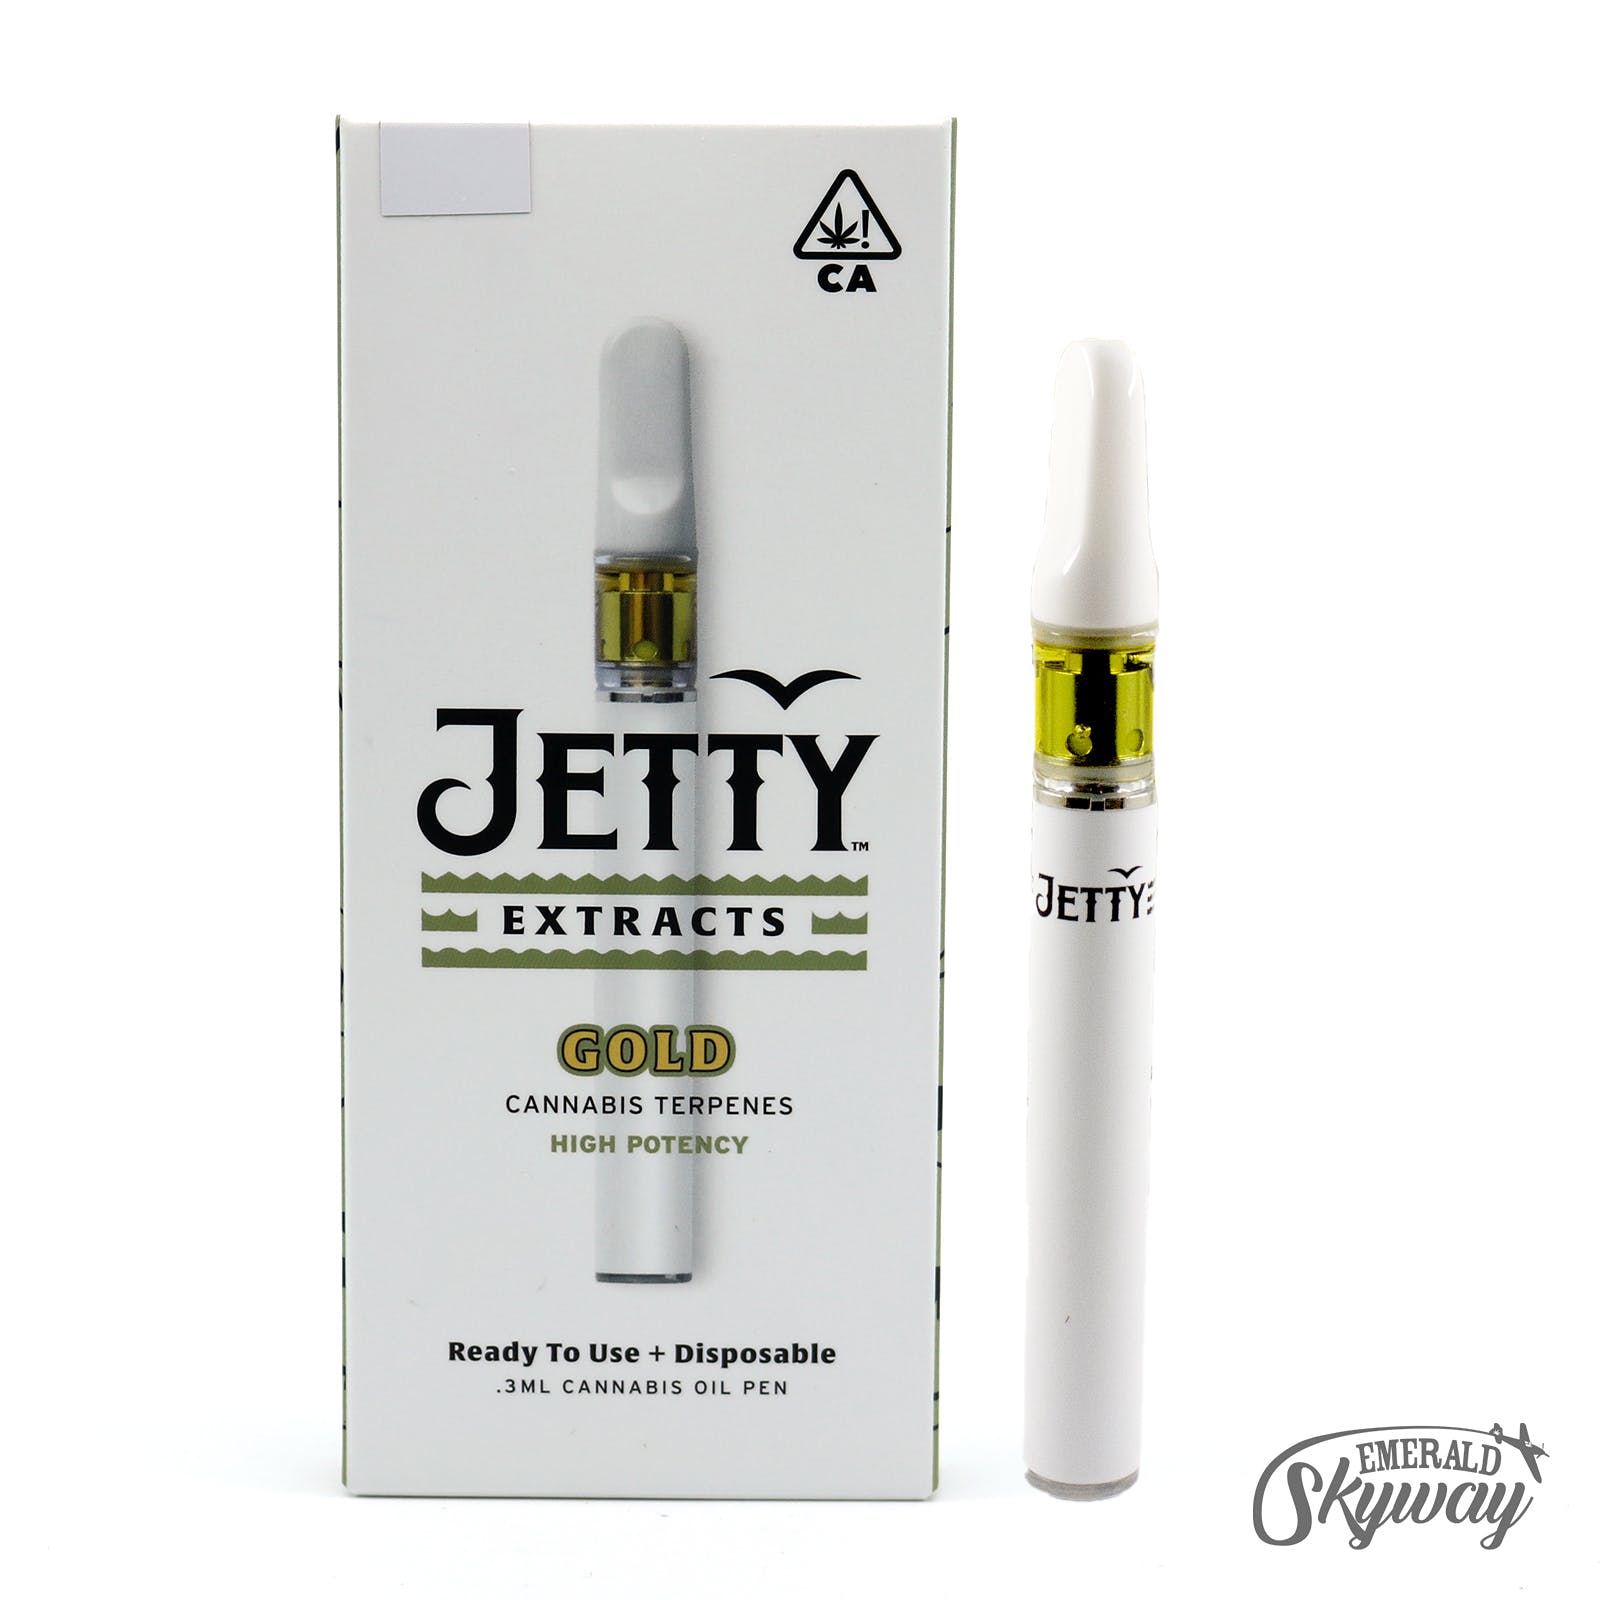 Jetty Extracts: Disposable - Maui Wowie